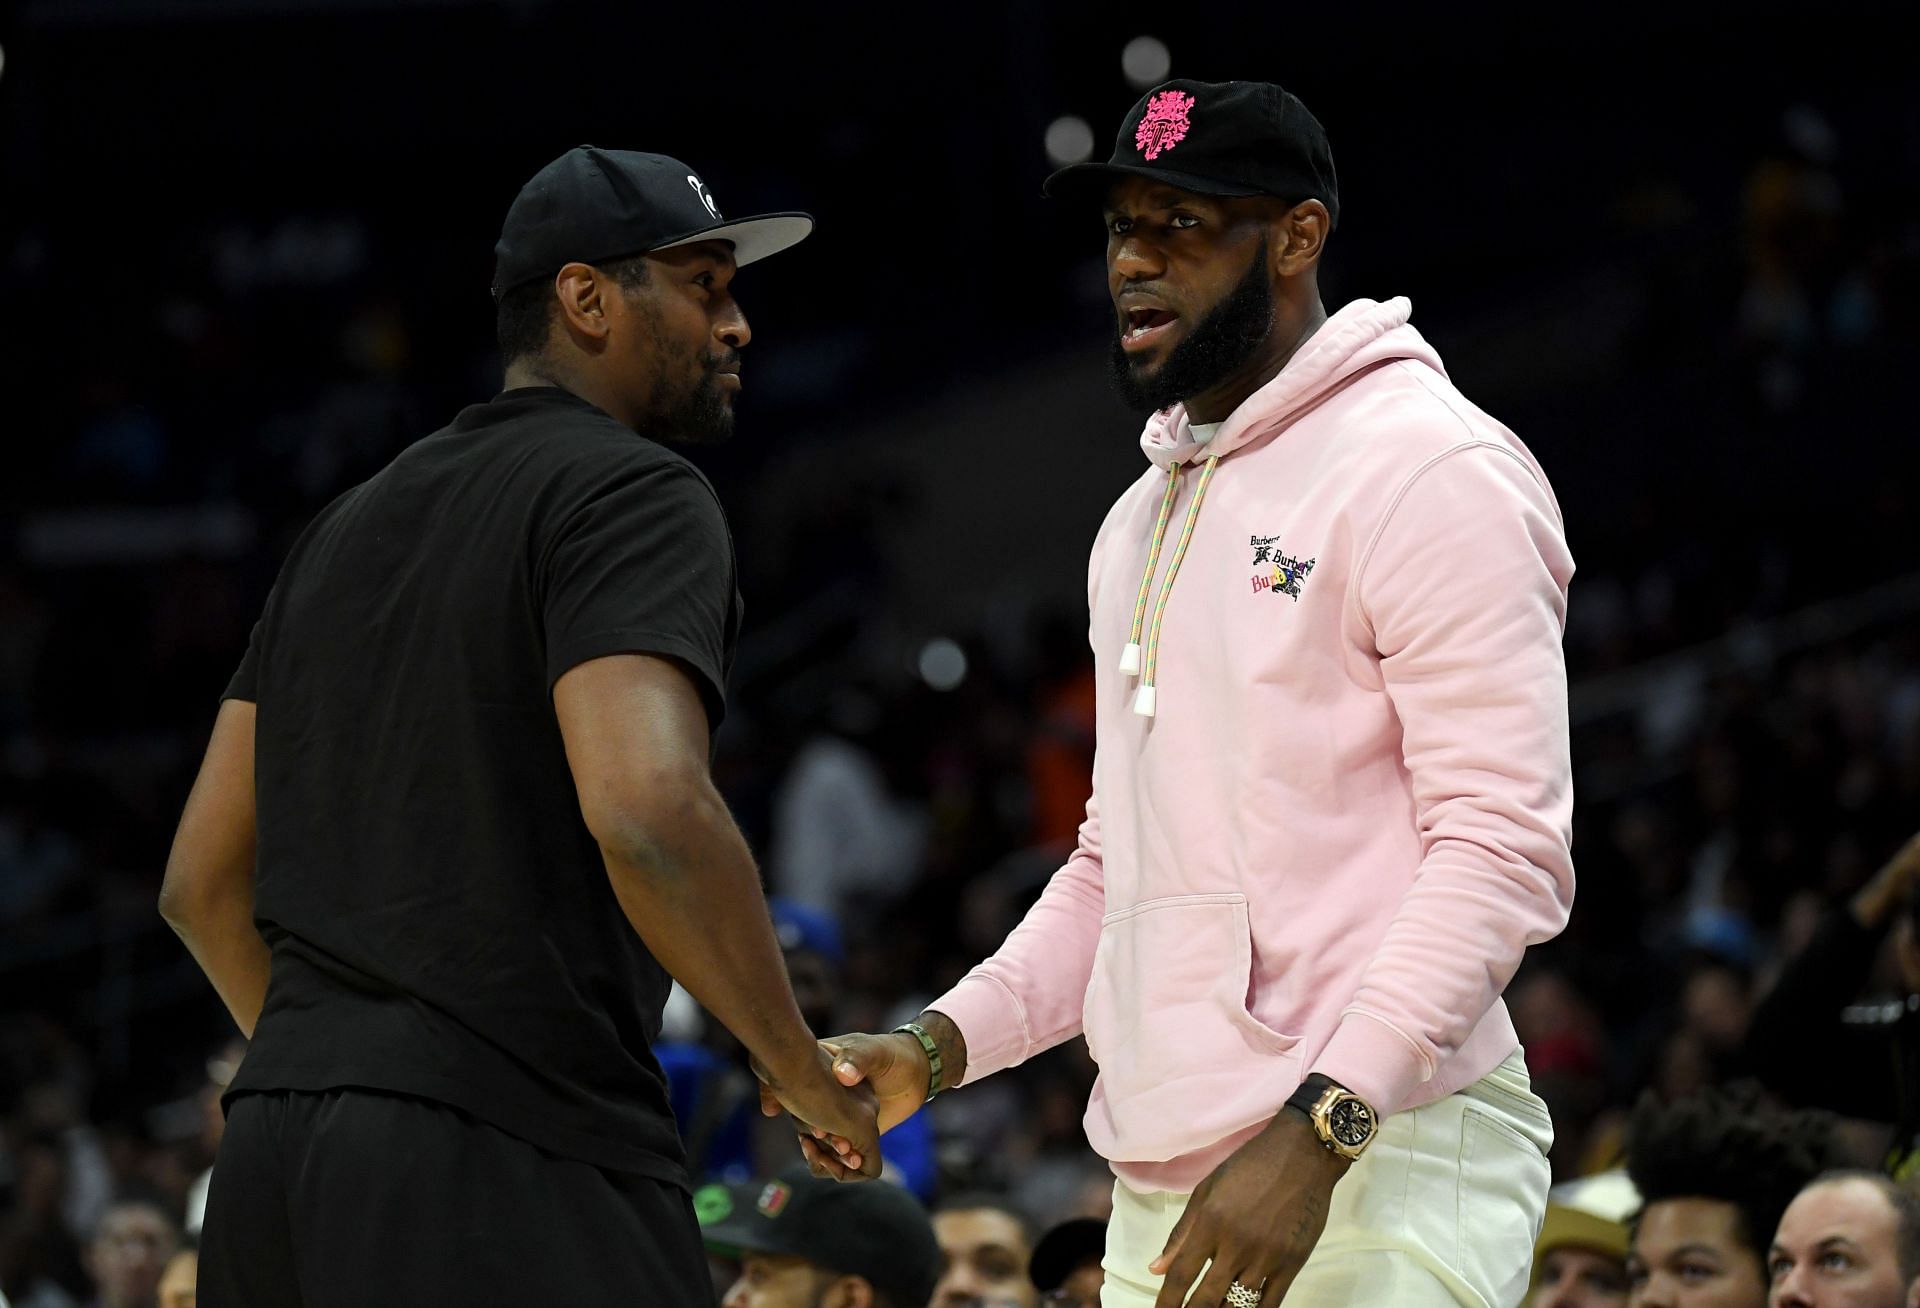 Metta World Peace with LeBron James during the BIG3 - Championship